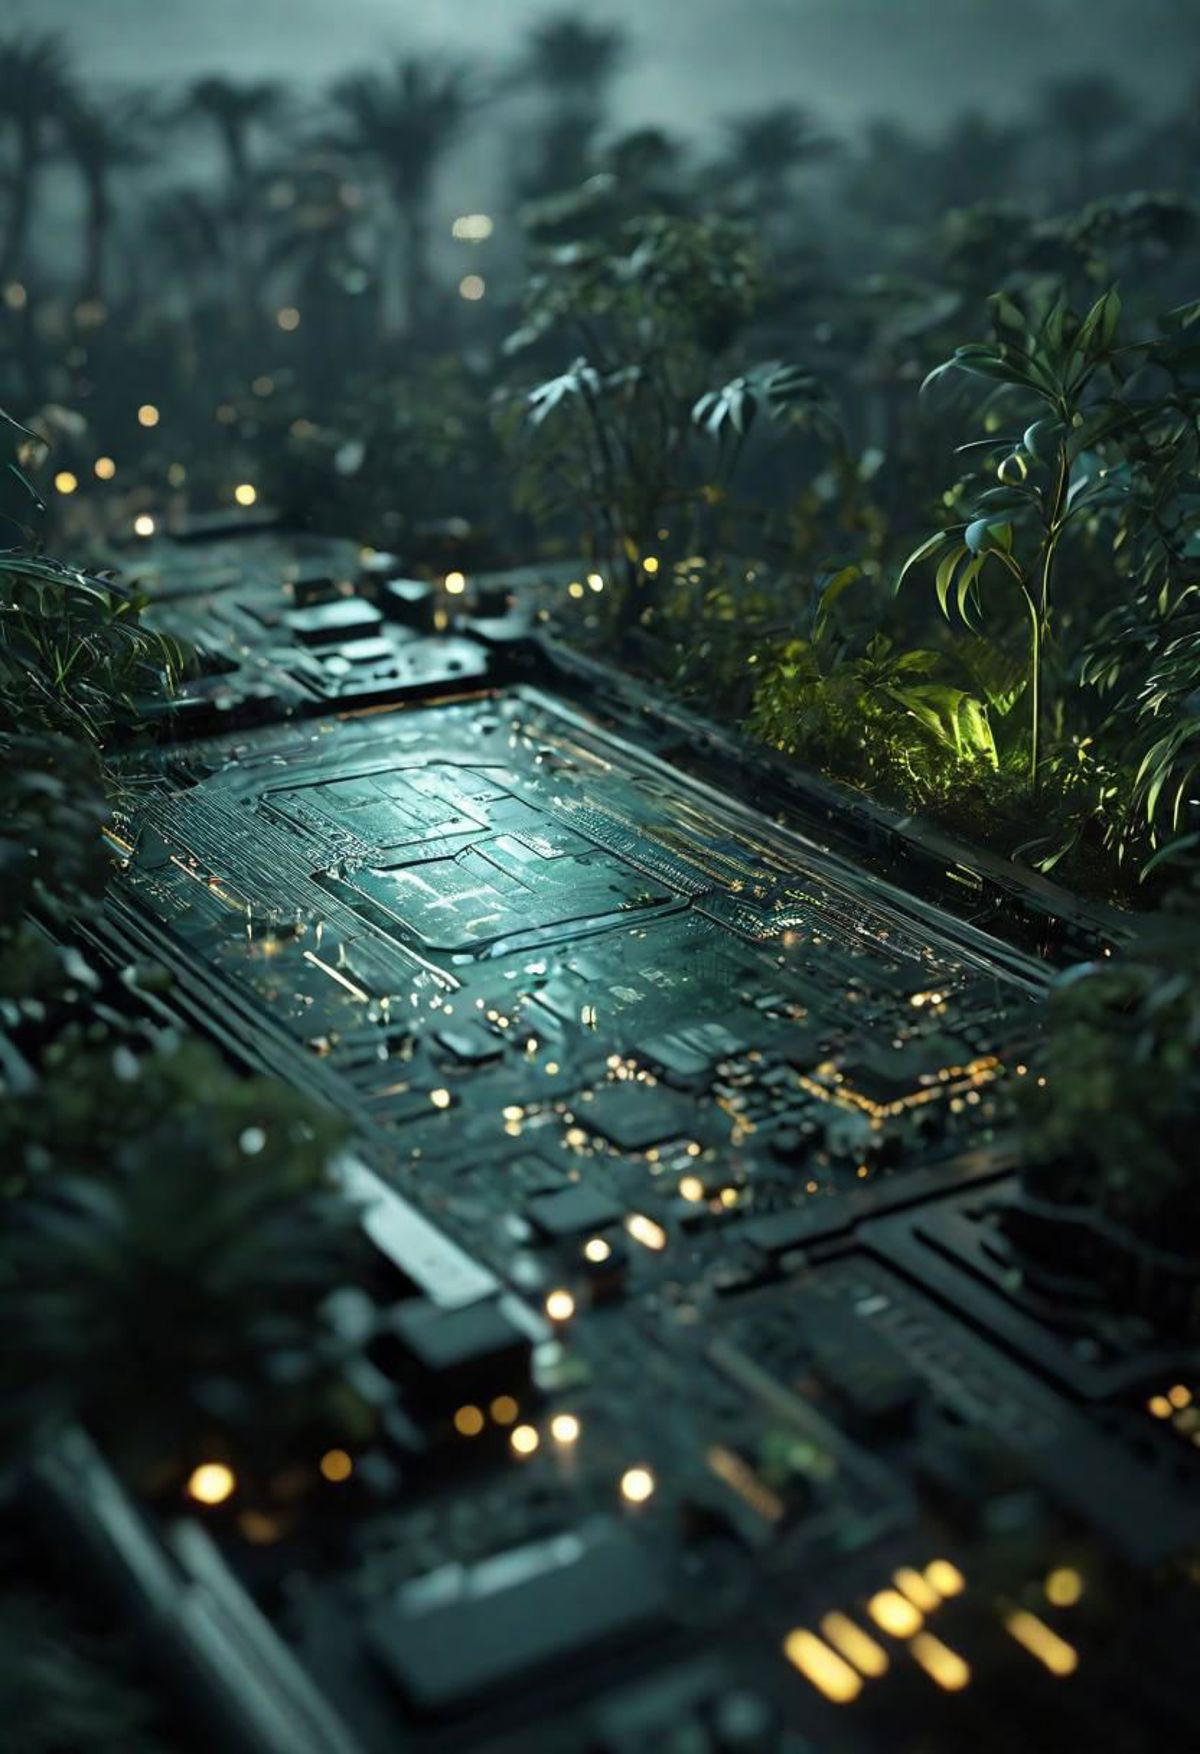 Dark Futuristic Circuit Boards image by tHeSenTineL